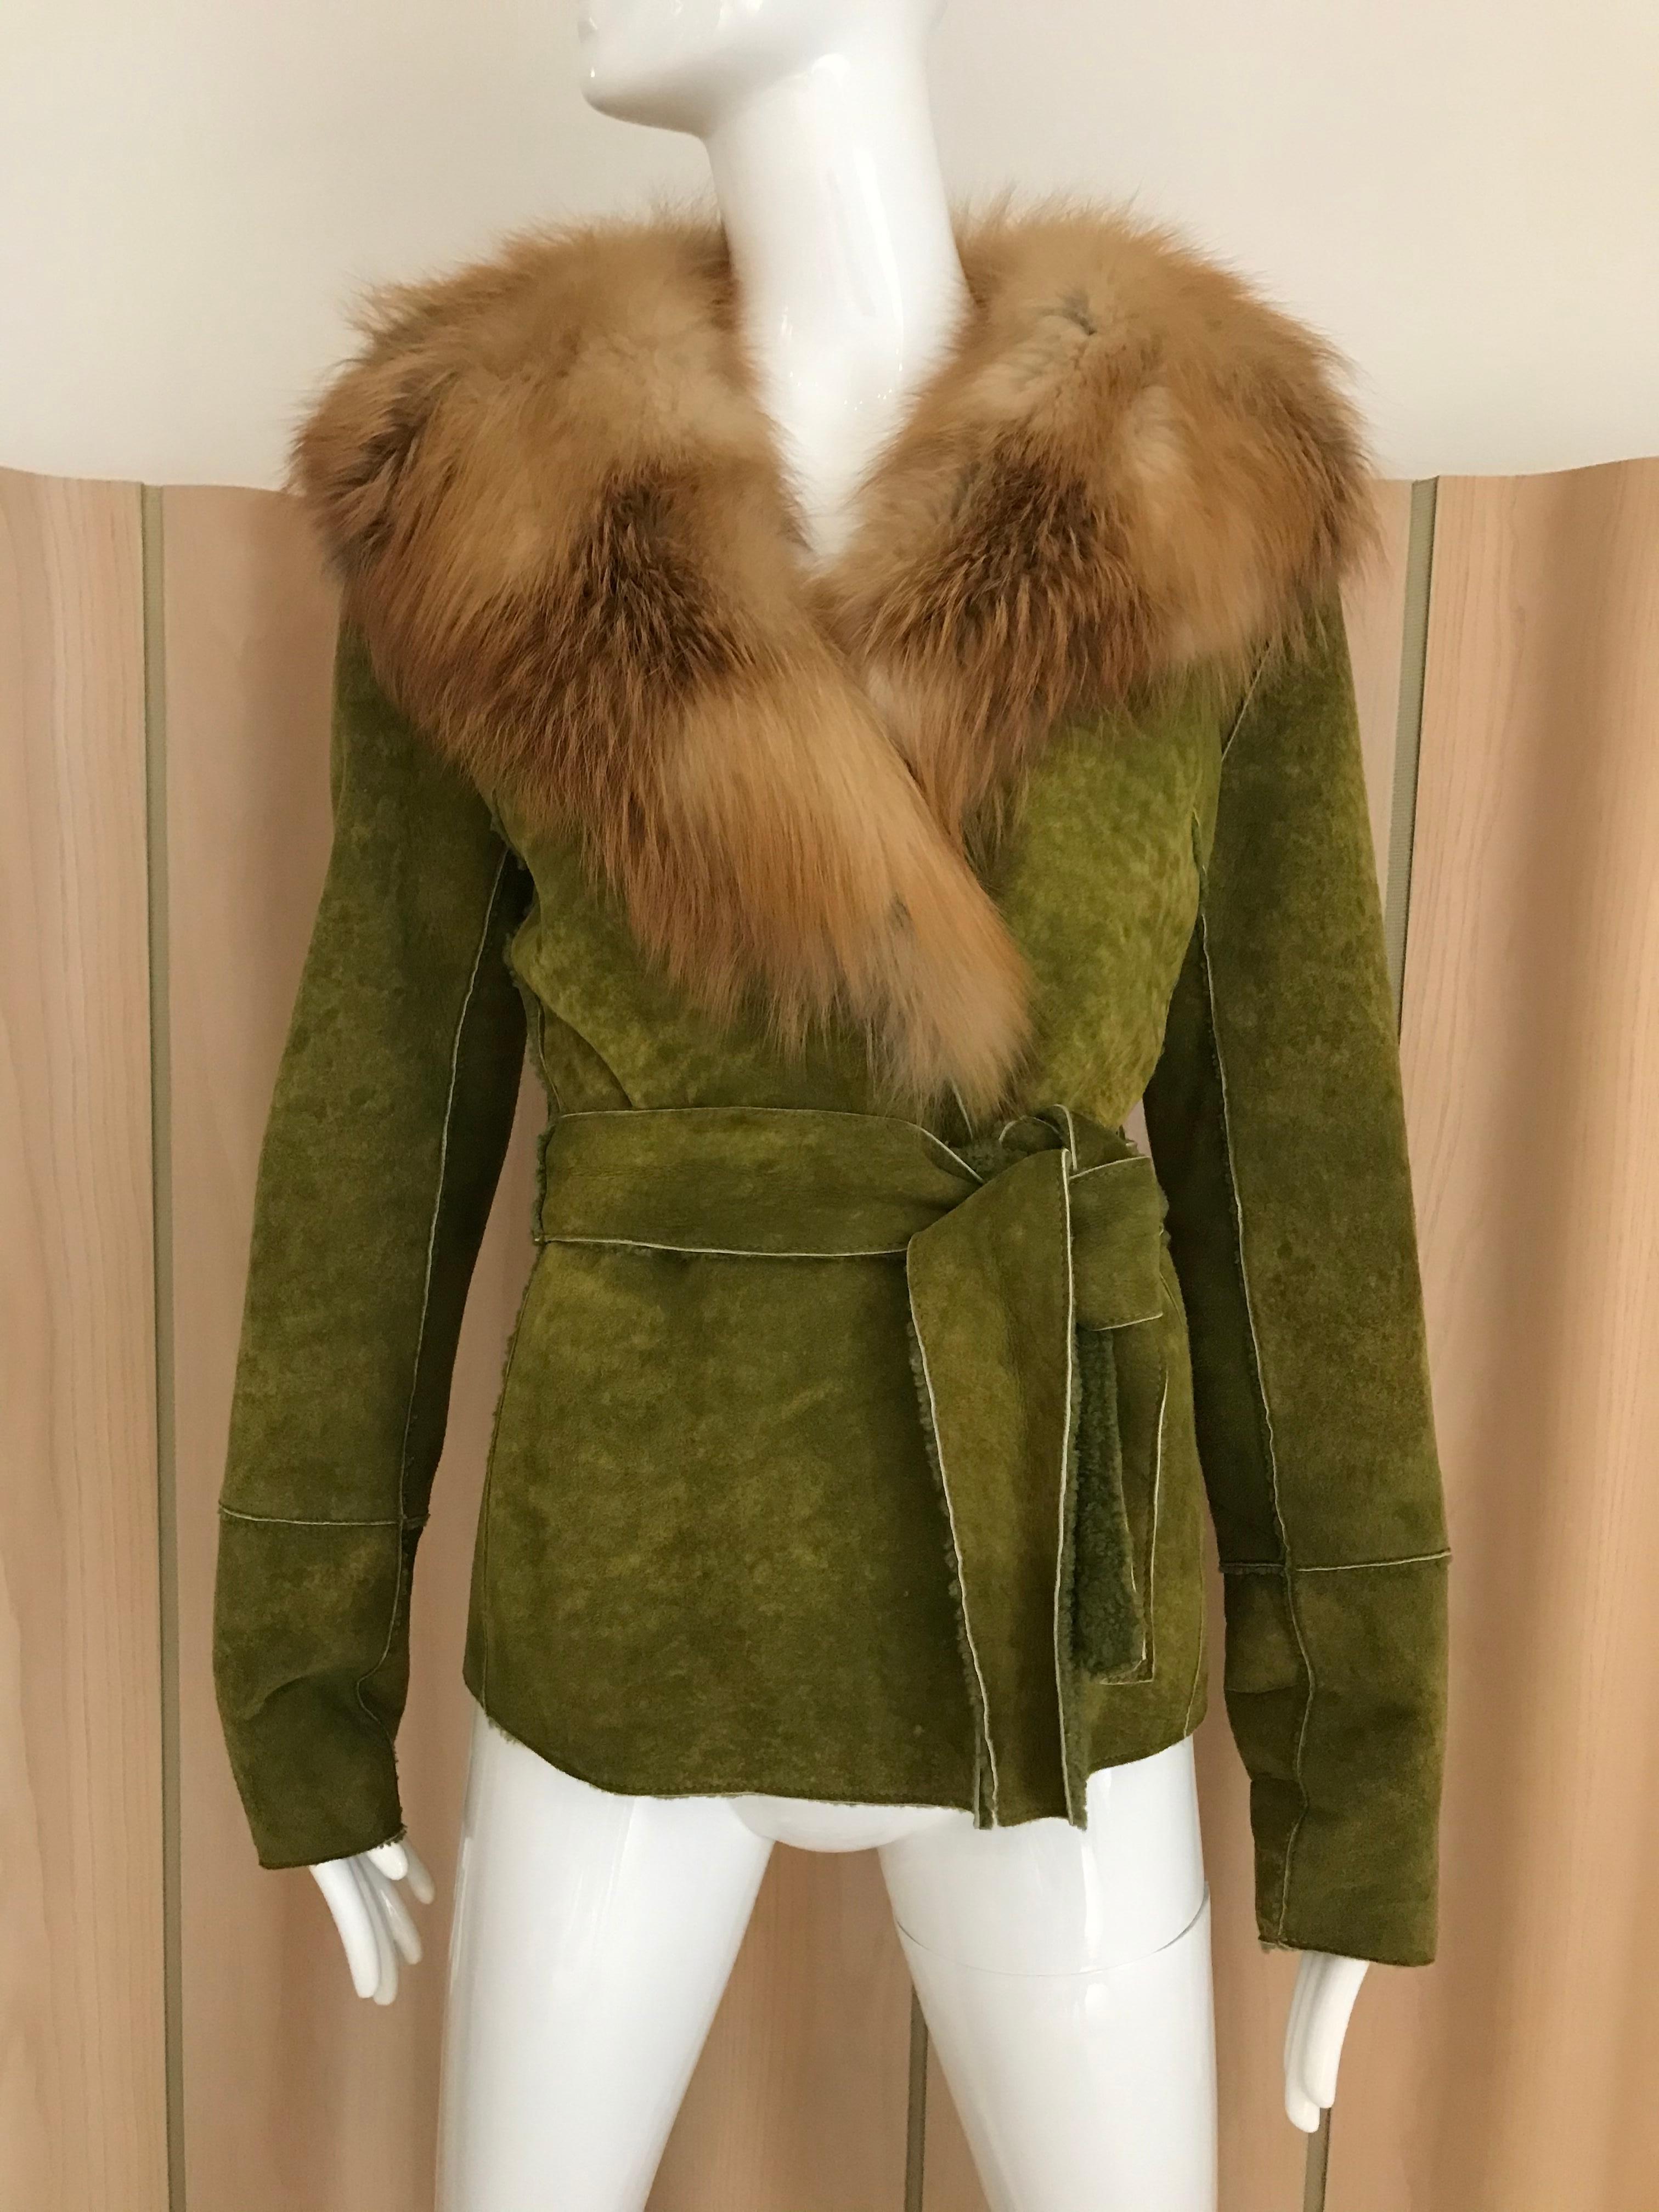 Fitted and glamorous Green Dolce & Gabbana Green Soft Suede Shearling Jacket with Fox collar and belt. Soft suede, with shearling lining.
Size: 4/6/8
Measurement; : Bust: 38inches/ Waist: 34 inches/ HIp: 38 inches/ Jacket length: 24 inches
Sleeve